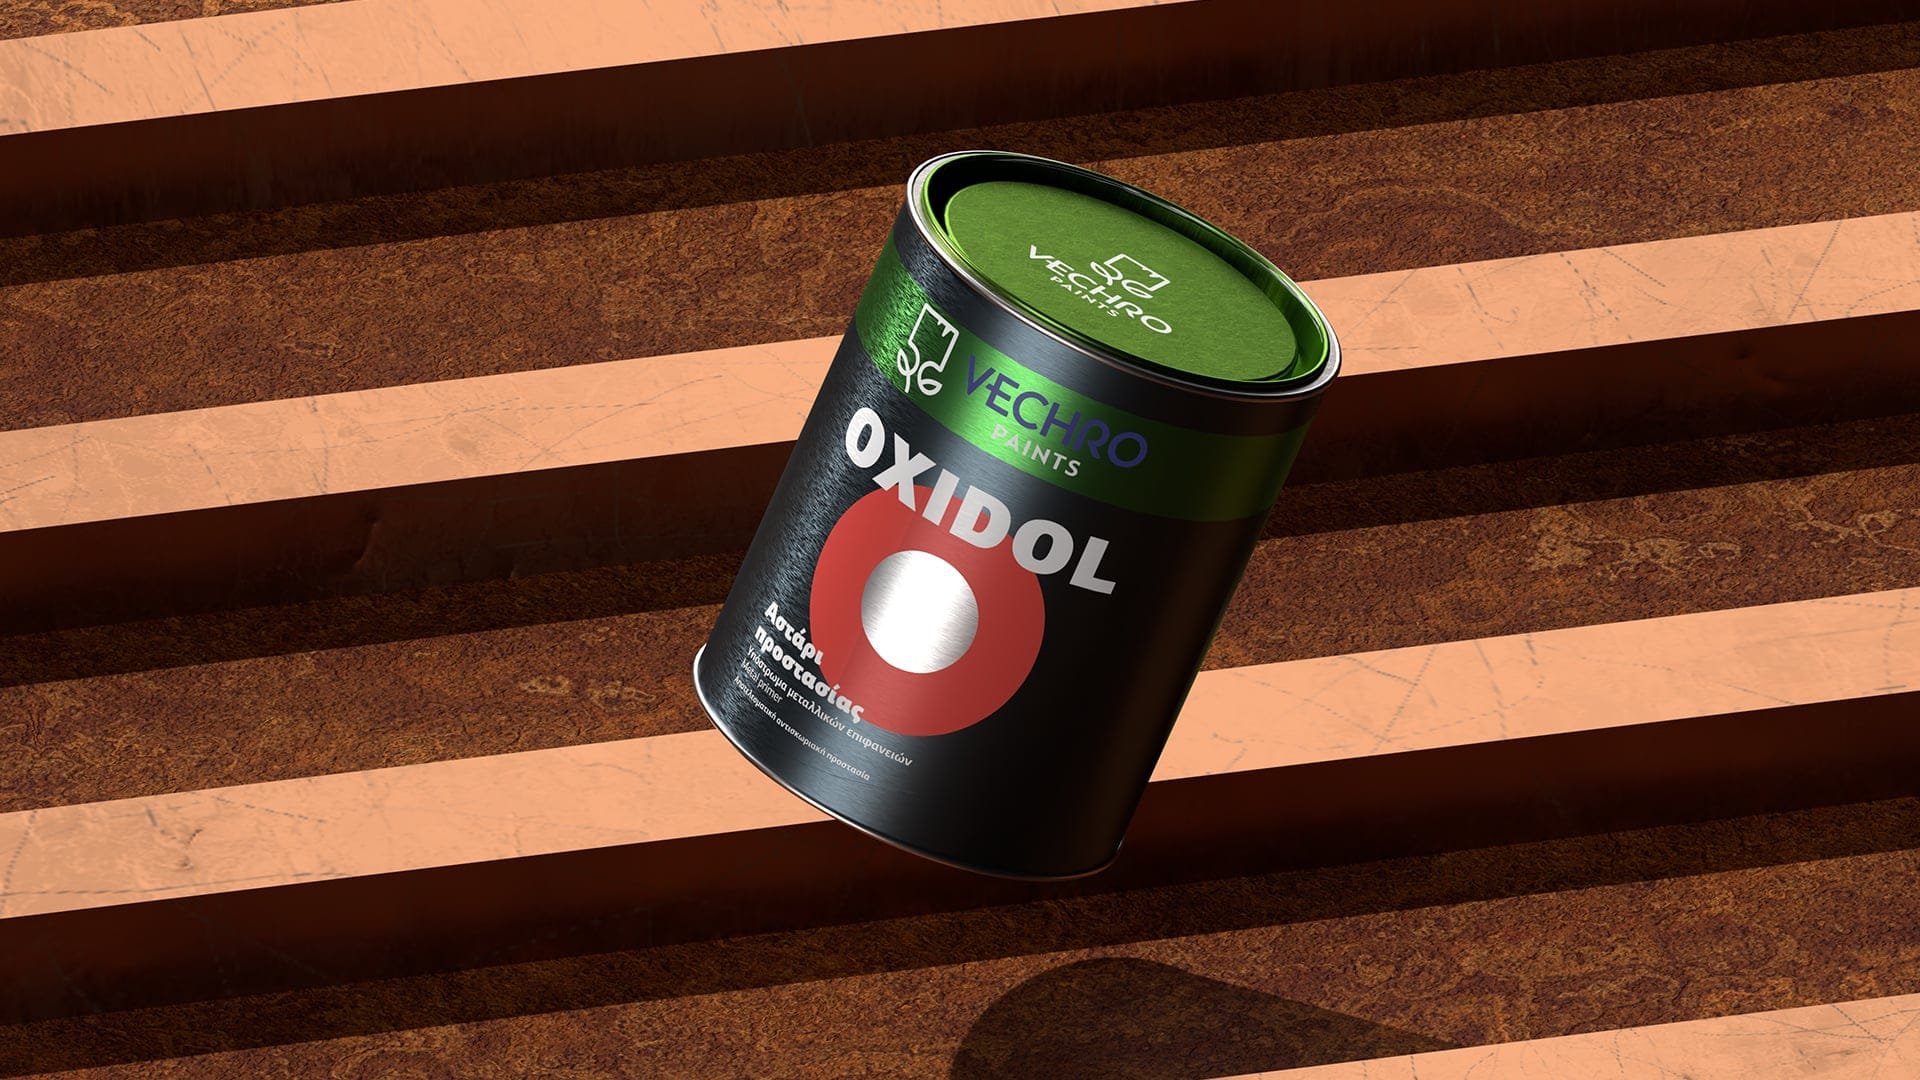 Vechro Oxidol paint can rebranded packaging and lid